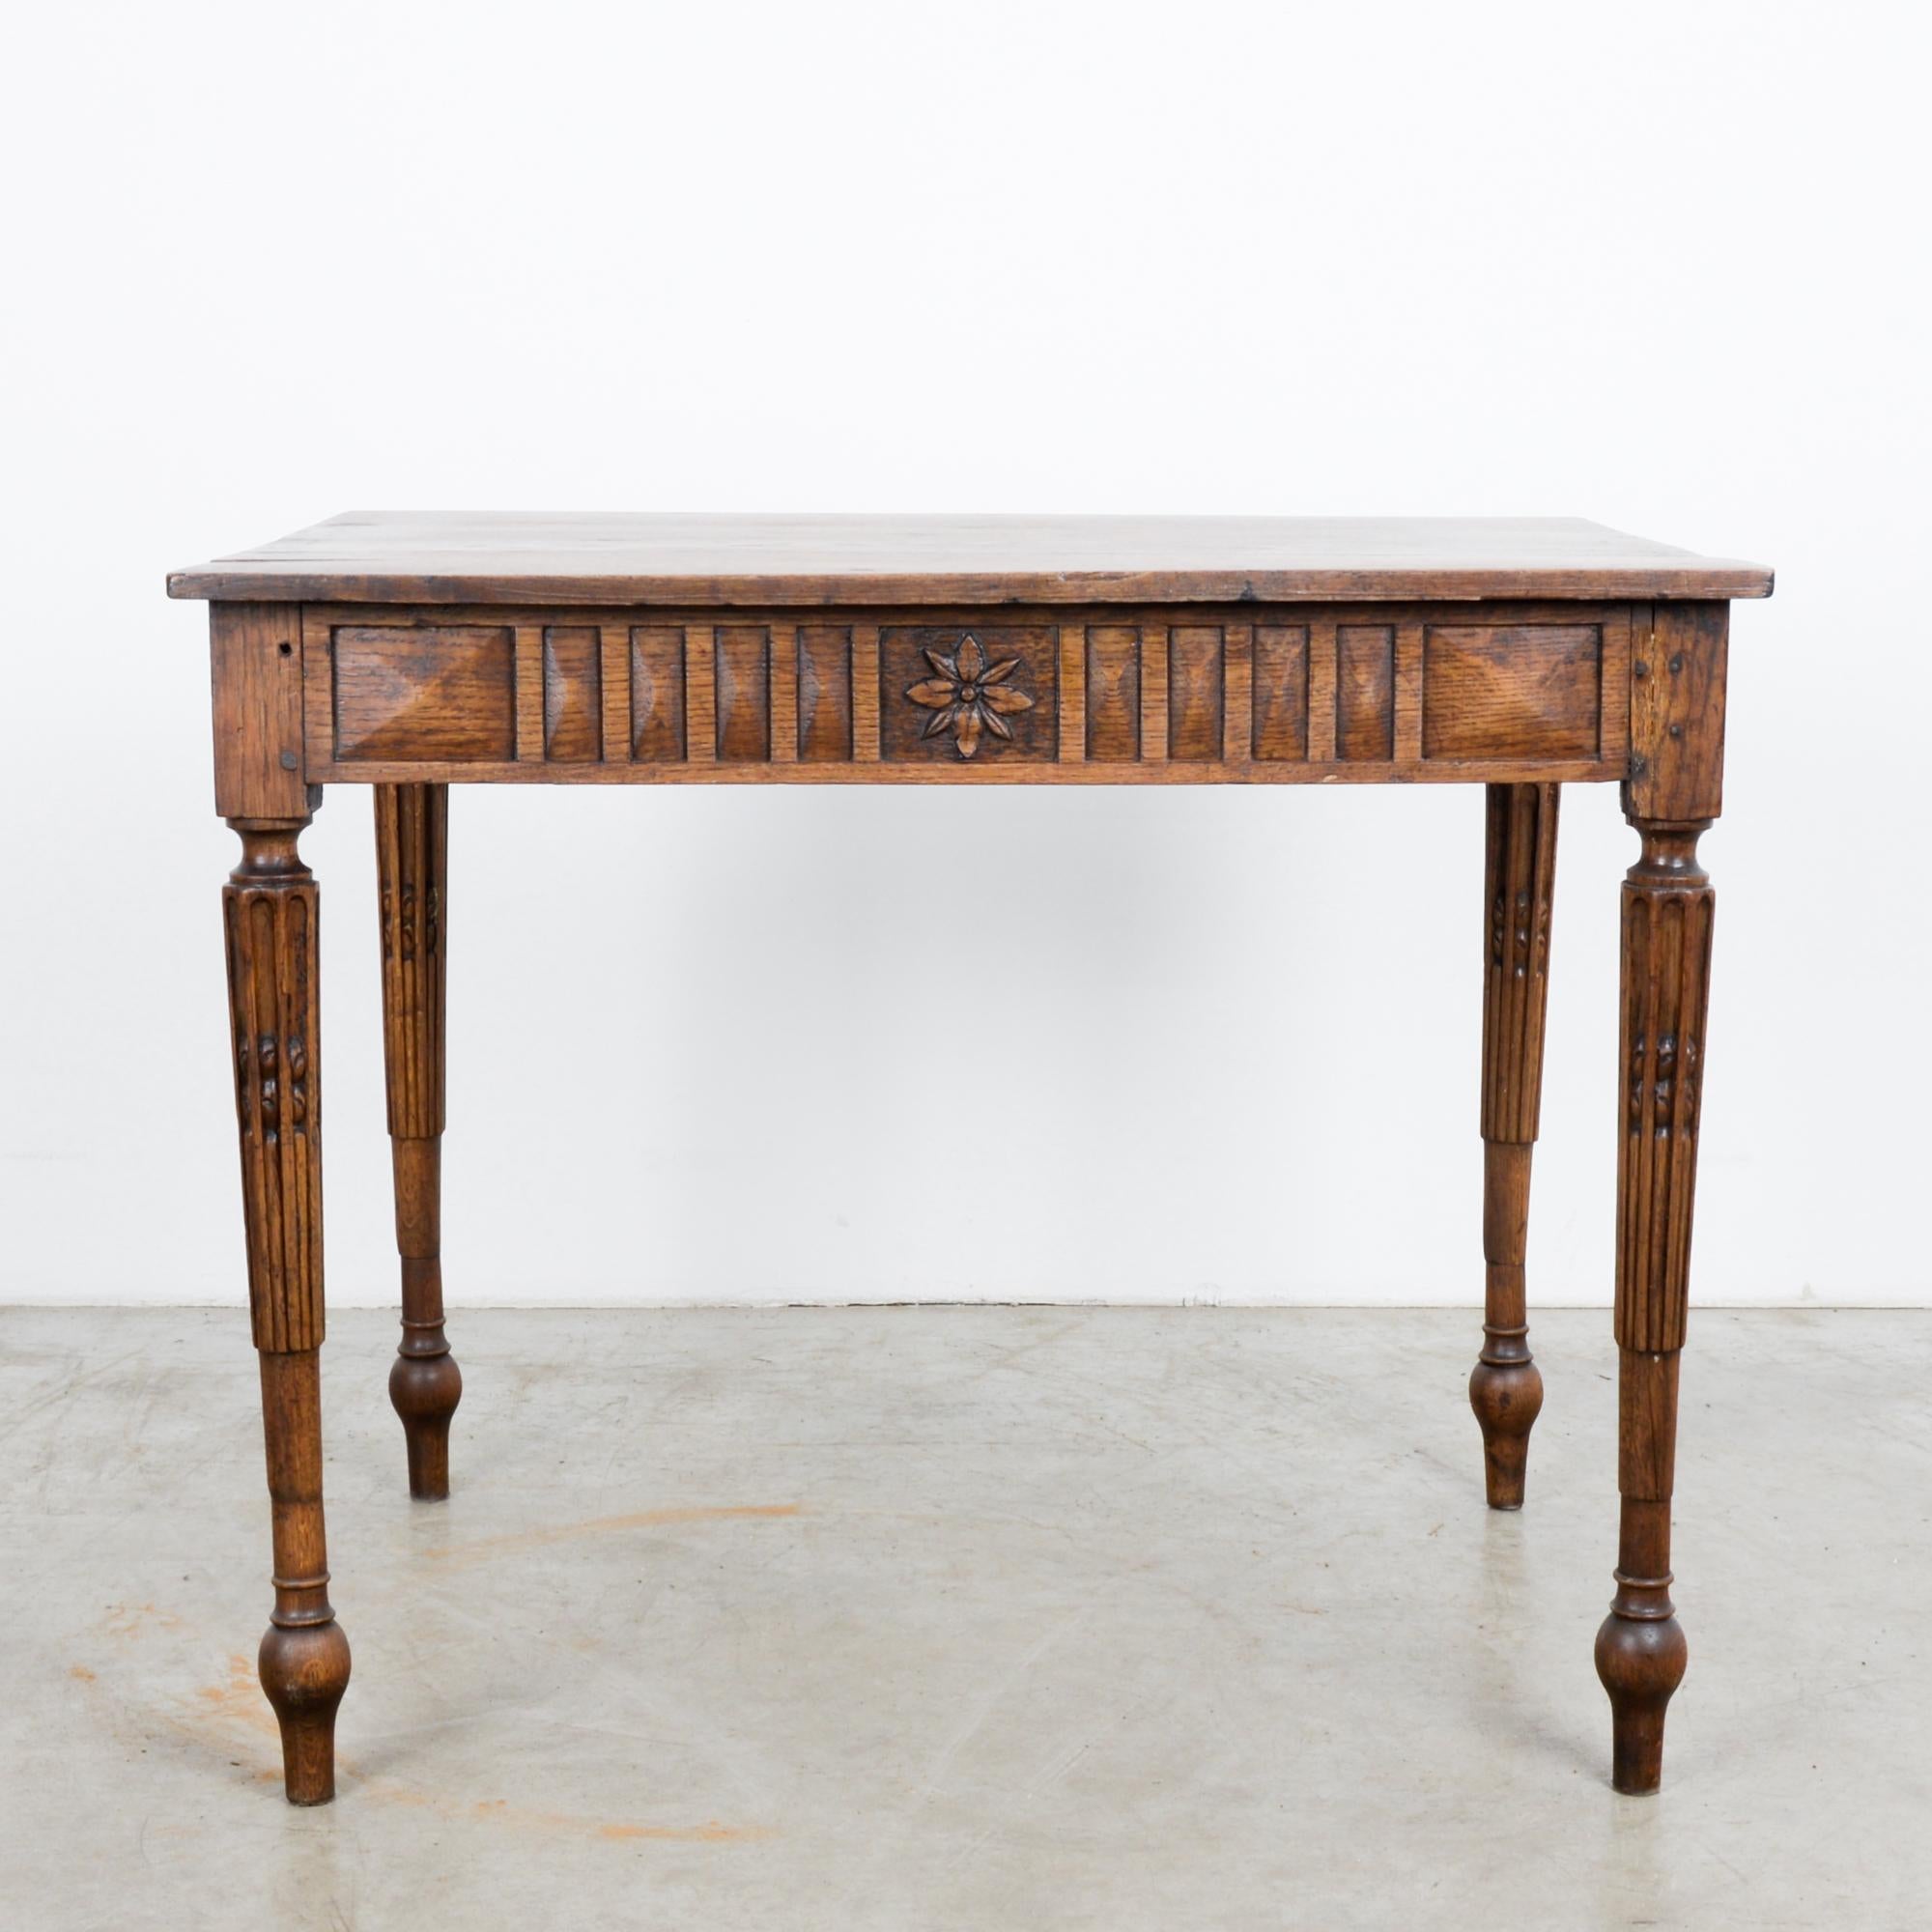 This wooden side table was made in France, circa 1880. It features a carved apron with rosettes in the center and neoclassical elements with fluted legs. The tabletop consists of wooden planks, which have a beautiful, time-worn patina. The deep and